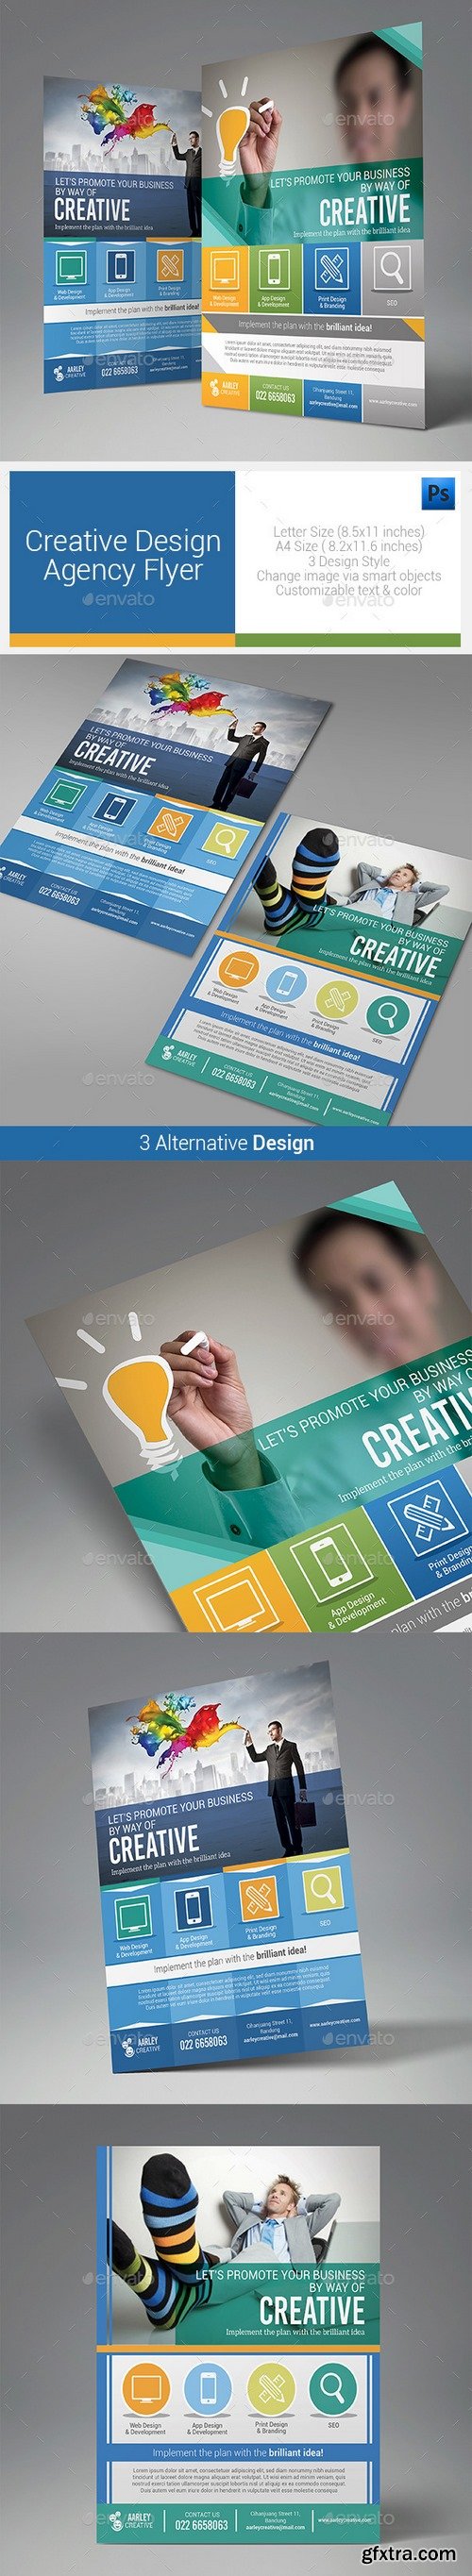 Graphicriver - Creative Design Agency Flyers 10147959